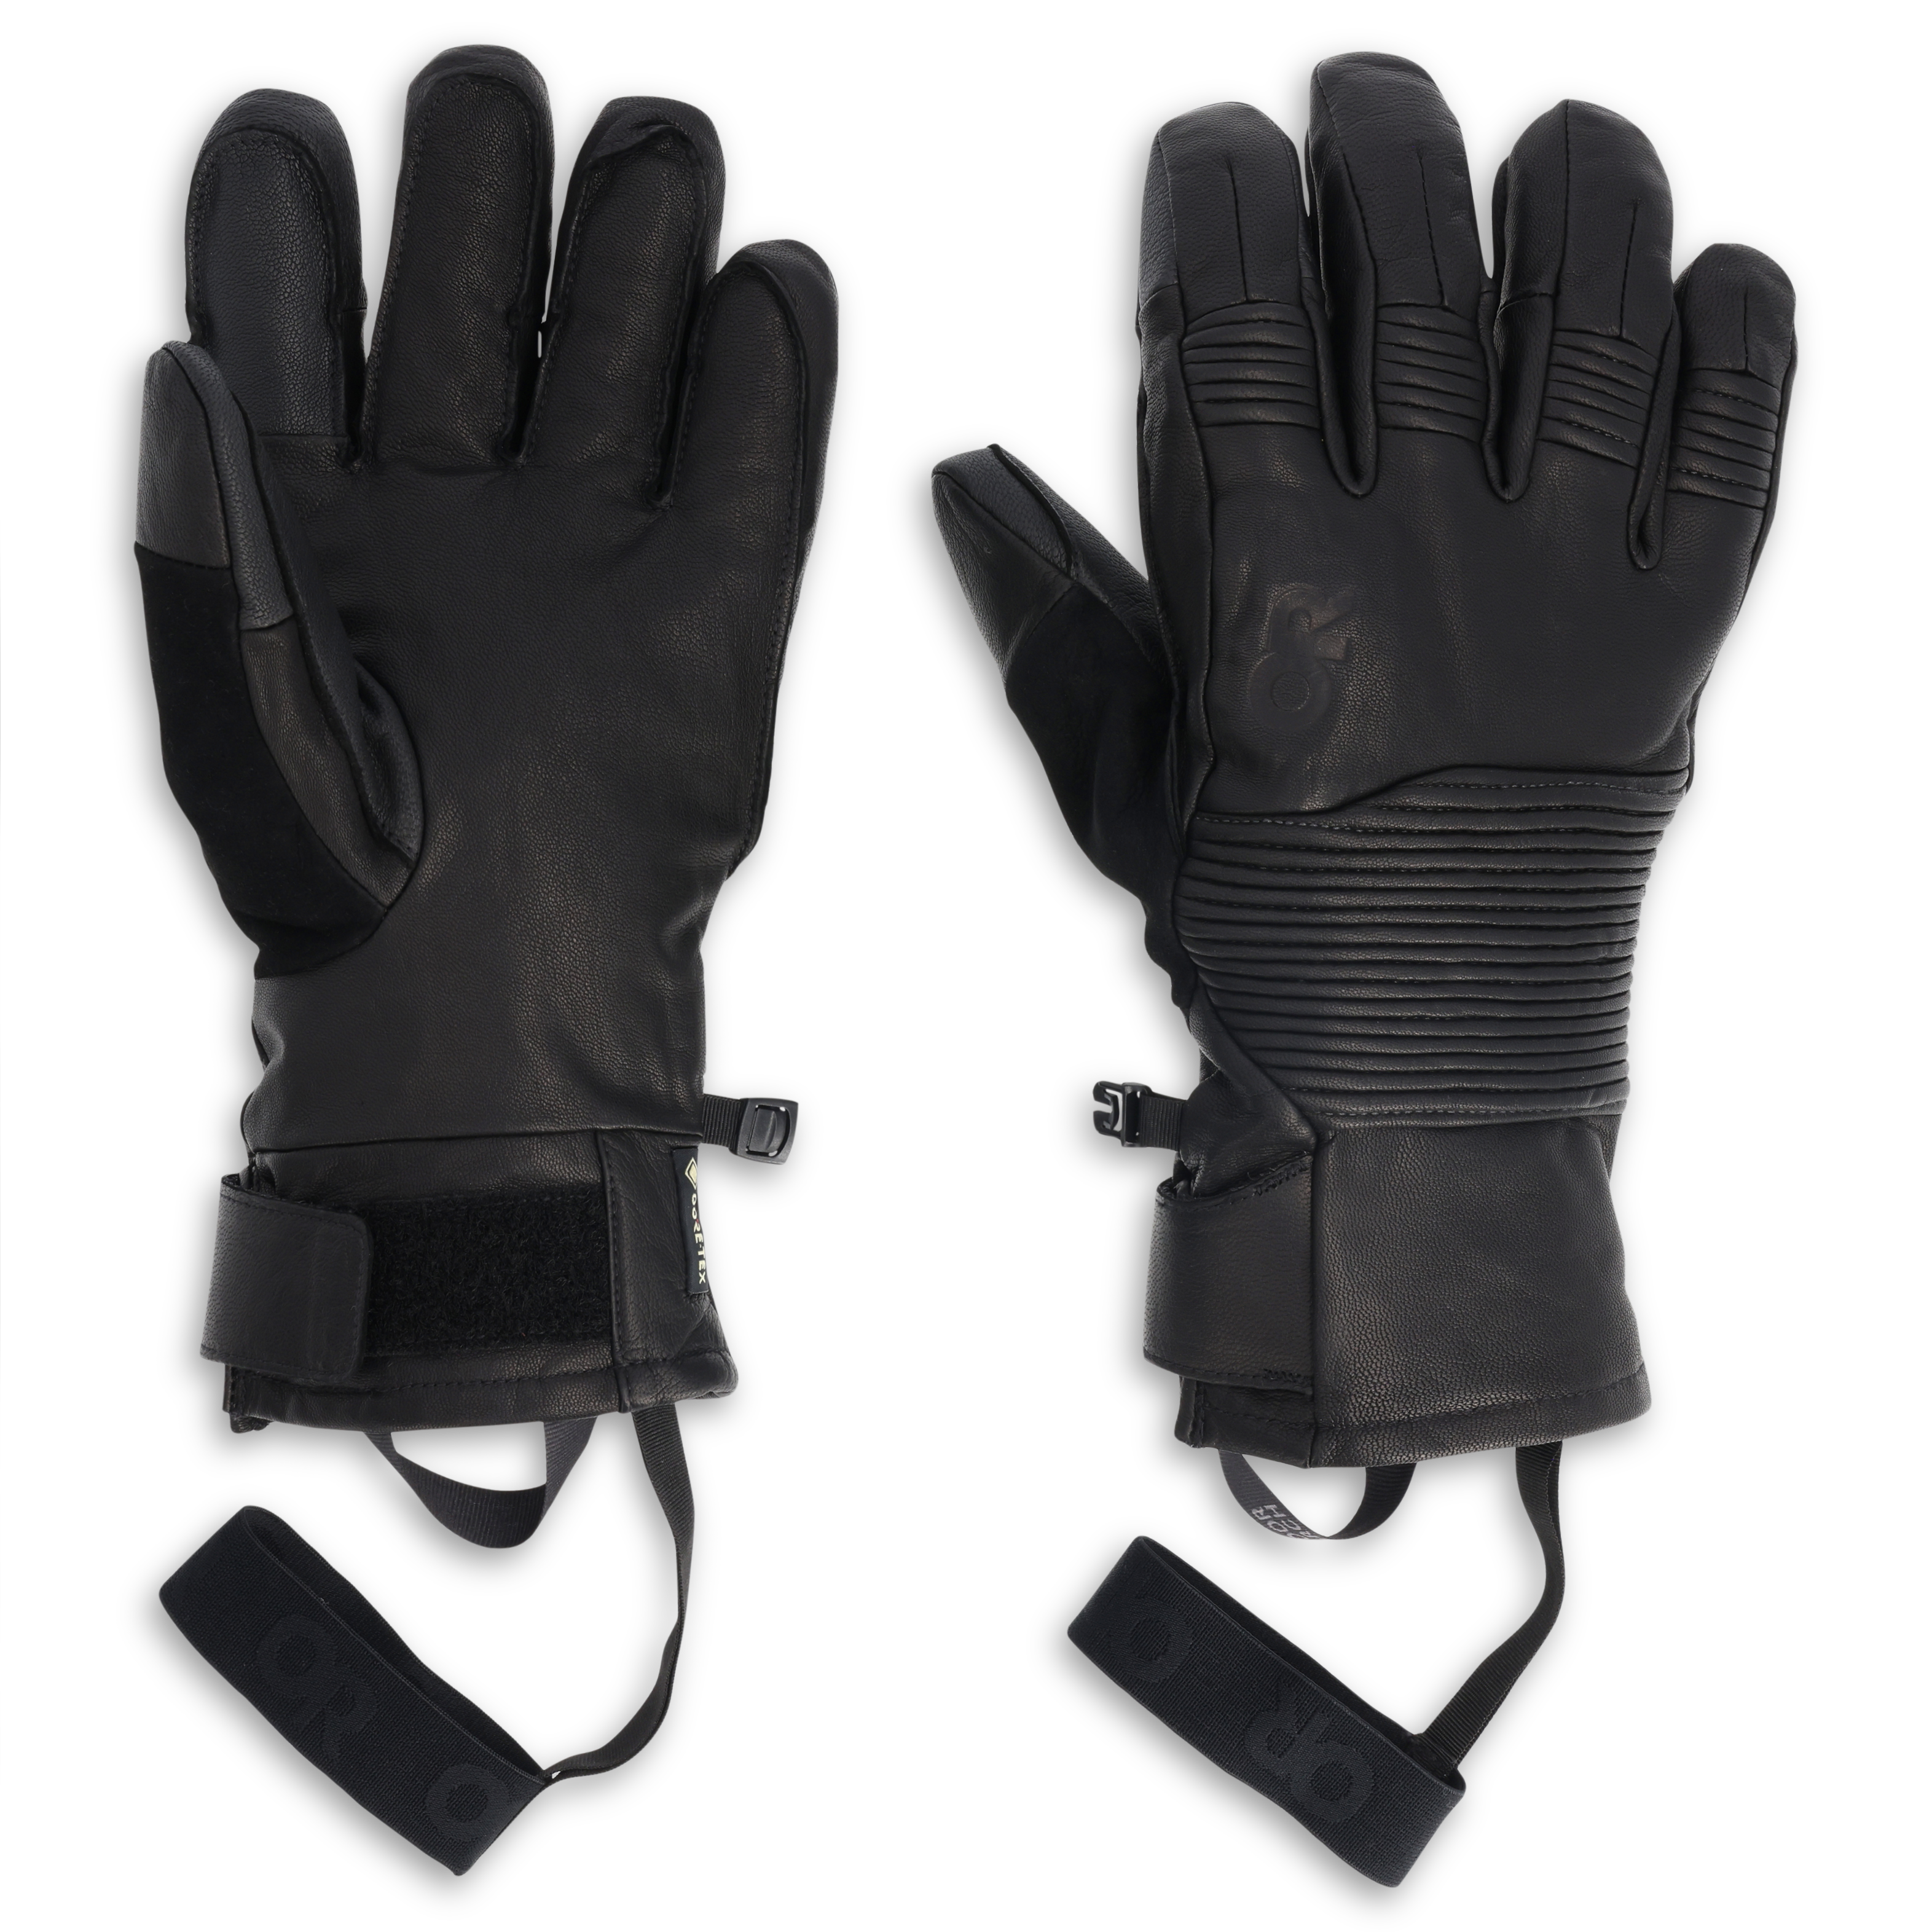 Extreme Pro Work Gloves, Touchscreen Compatible, L